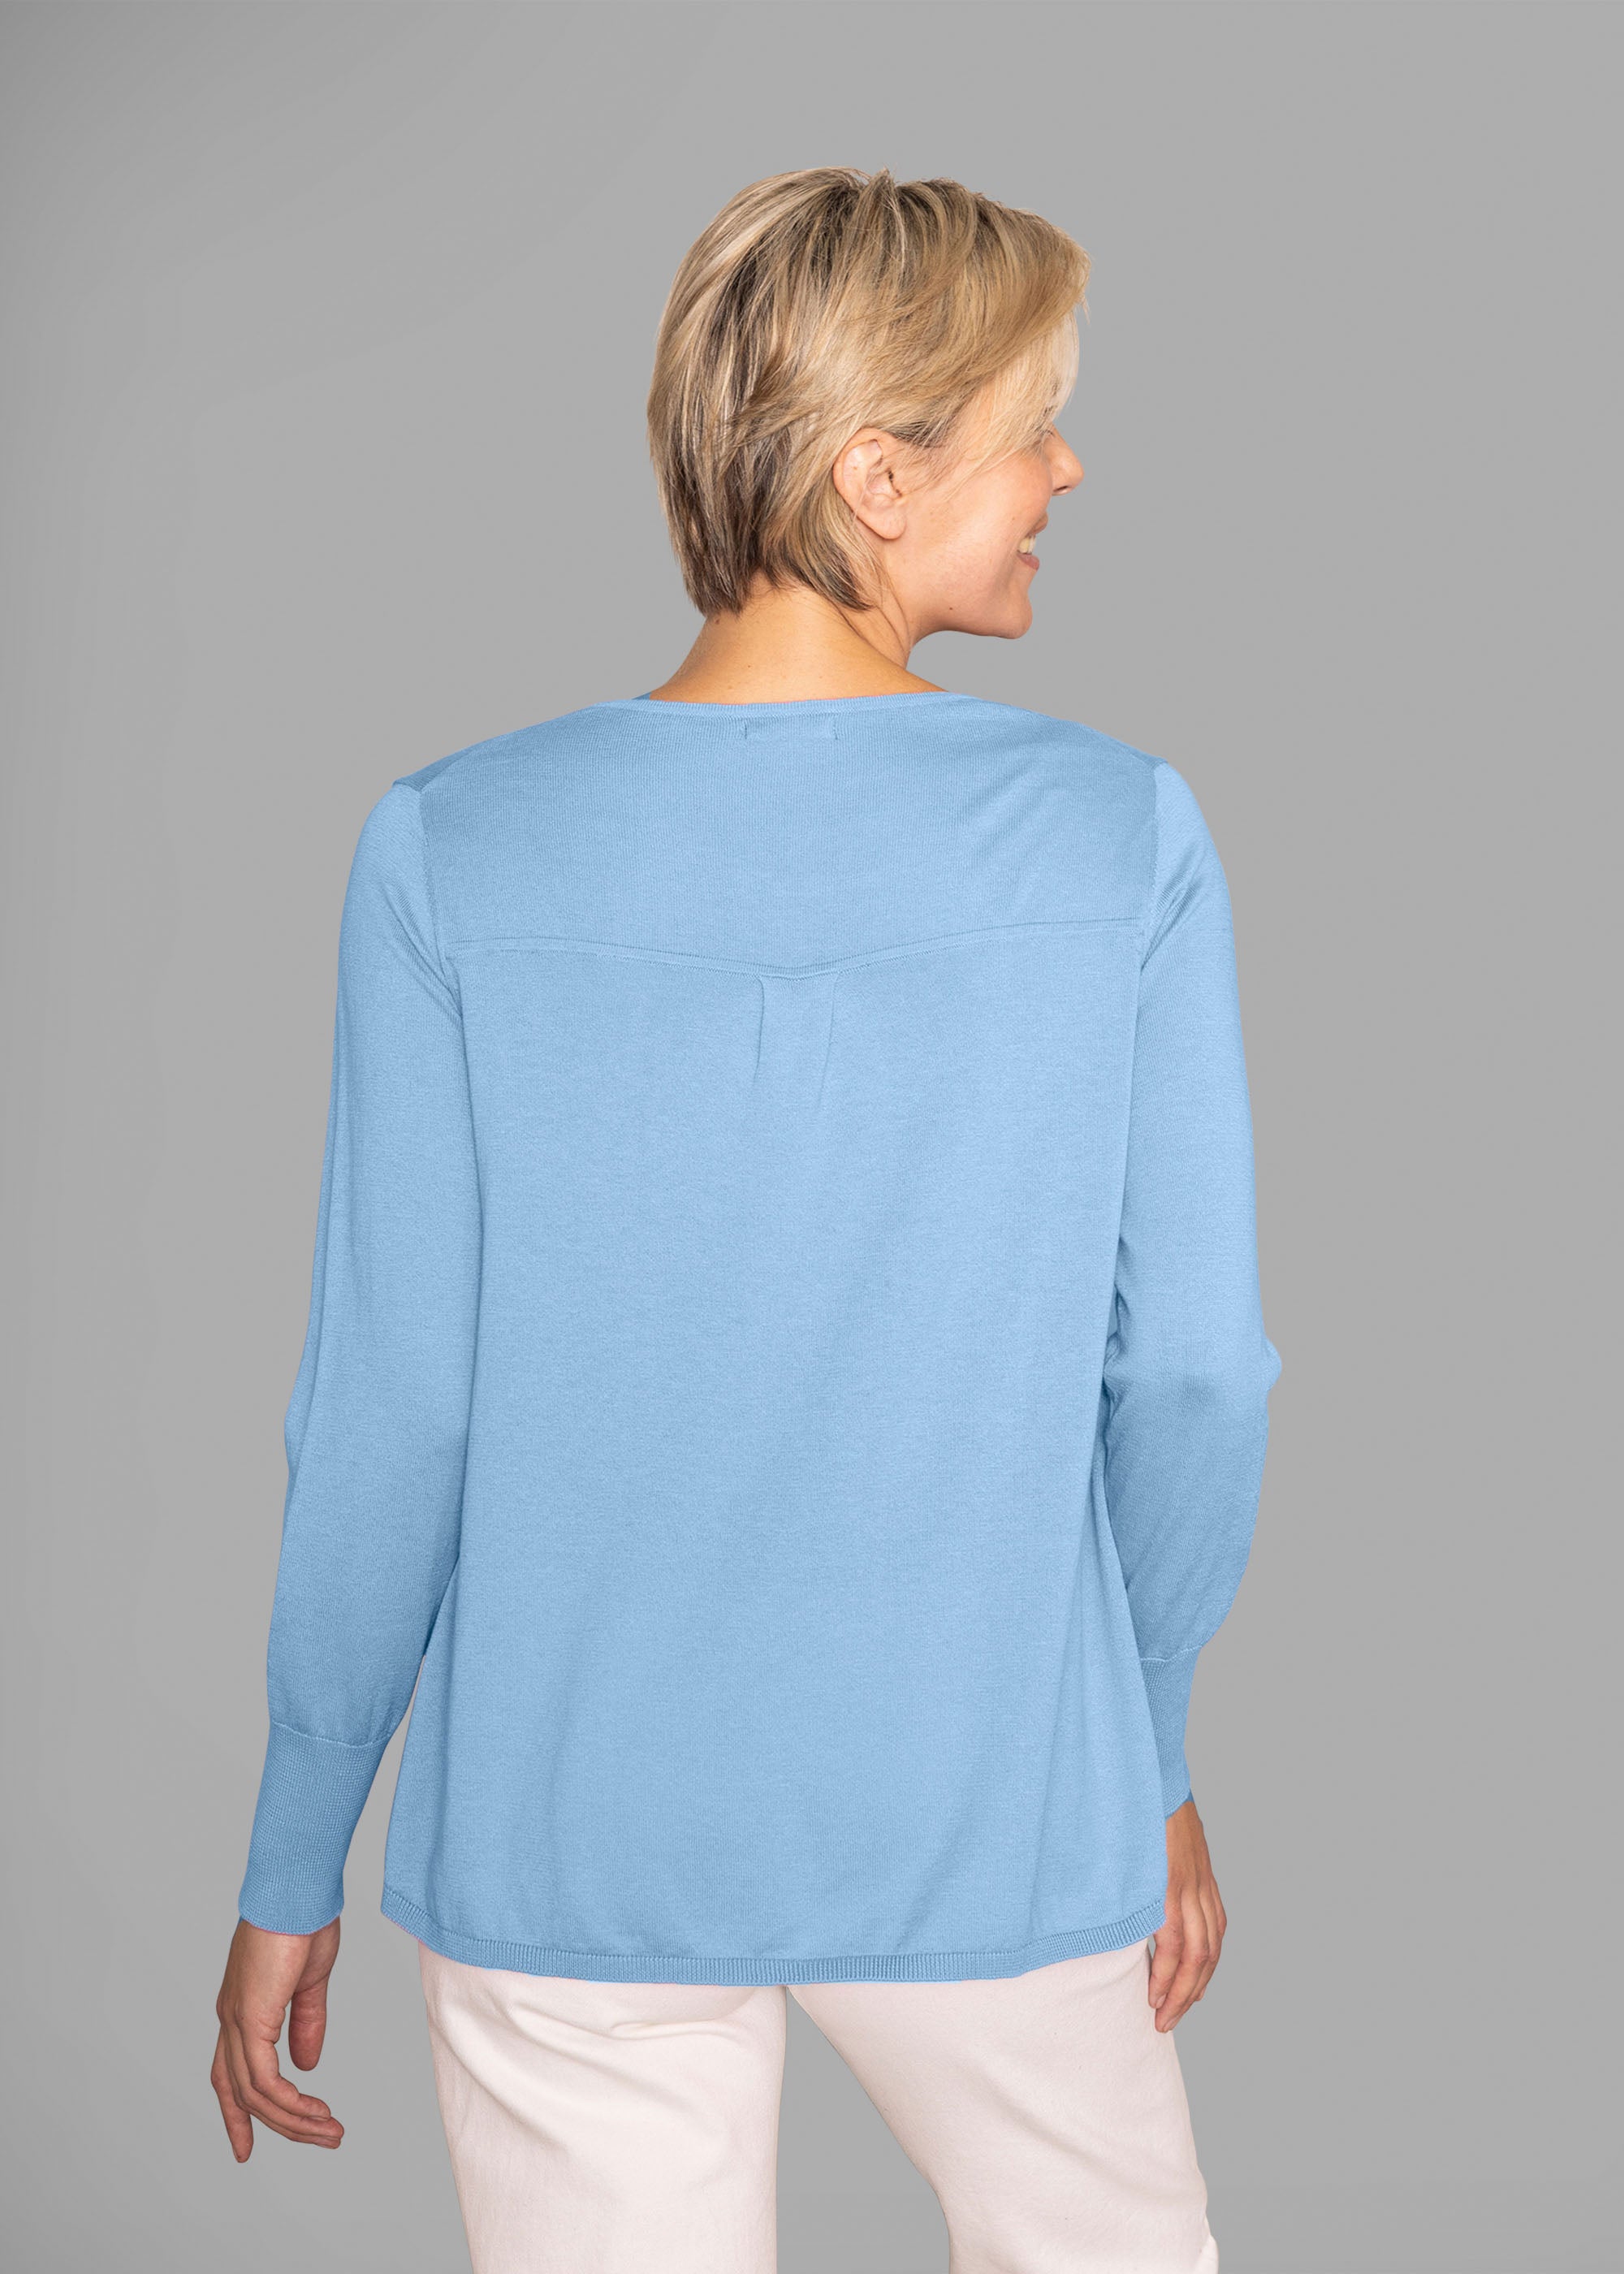 Pullover Modell "Amelie"